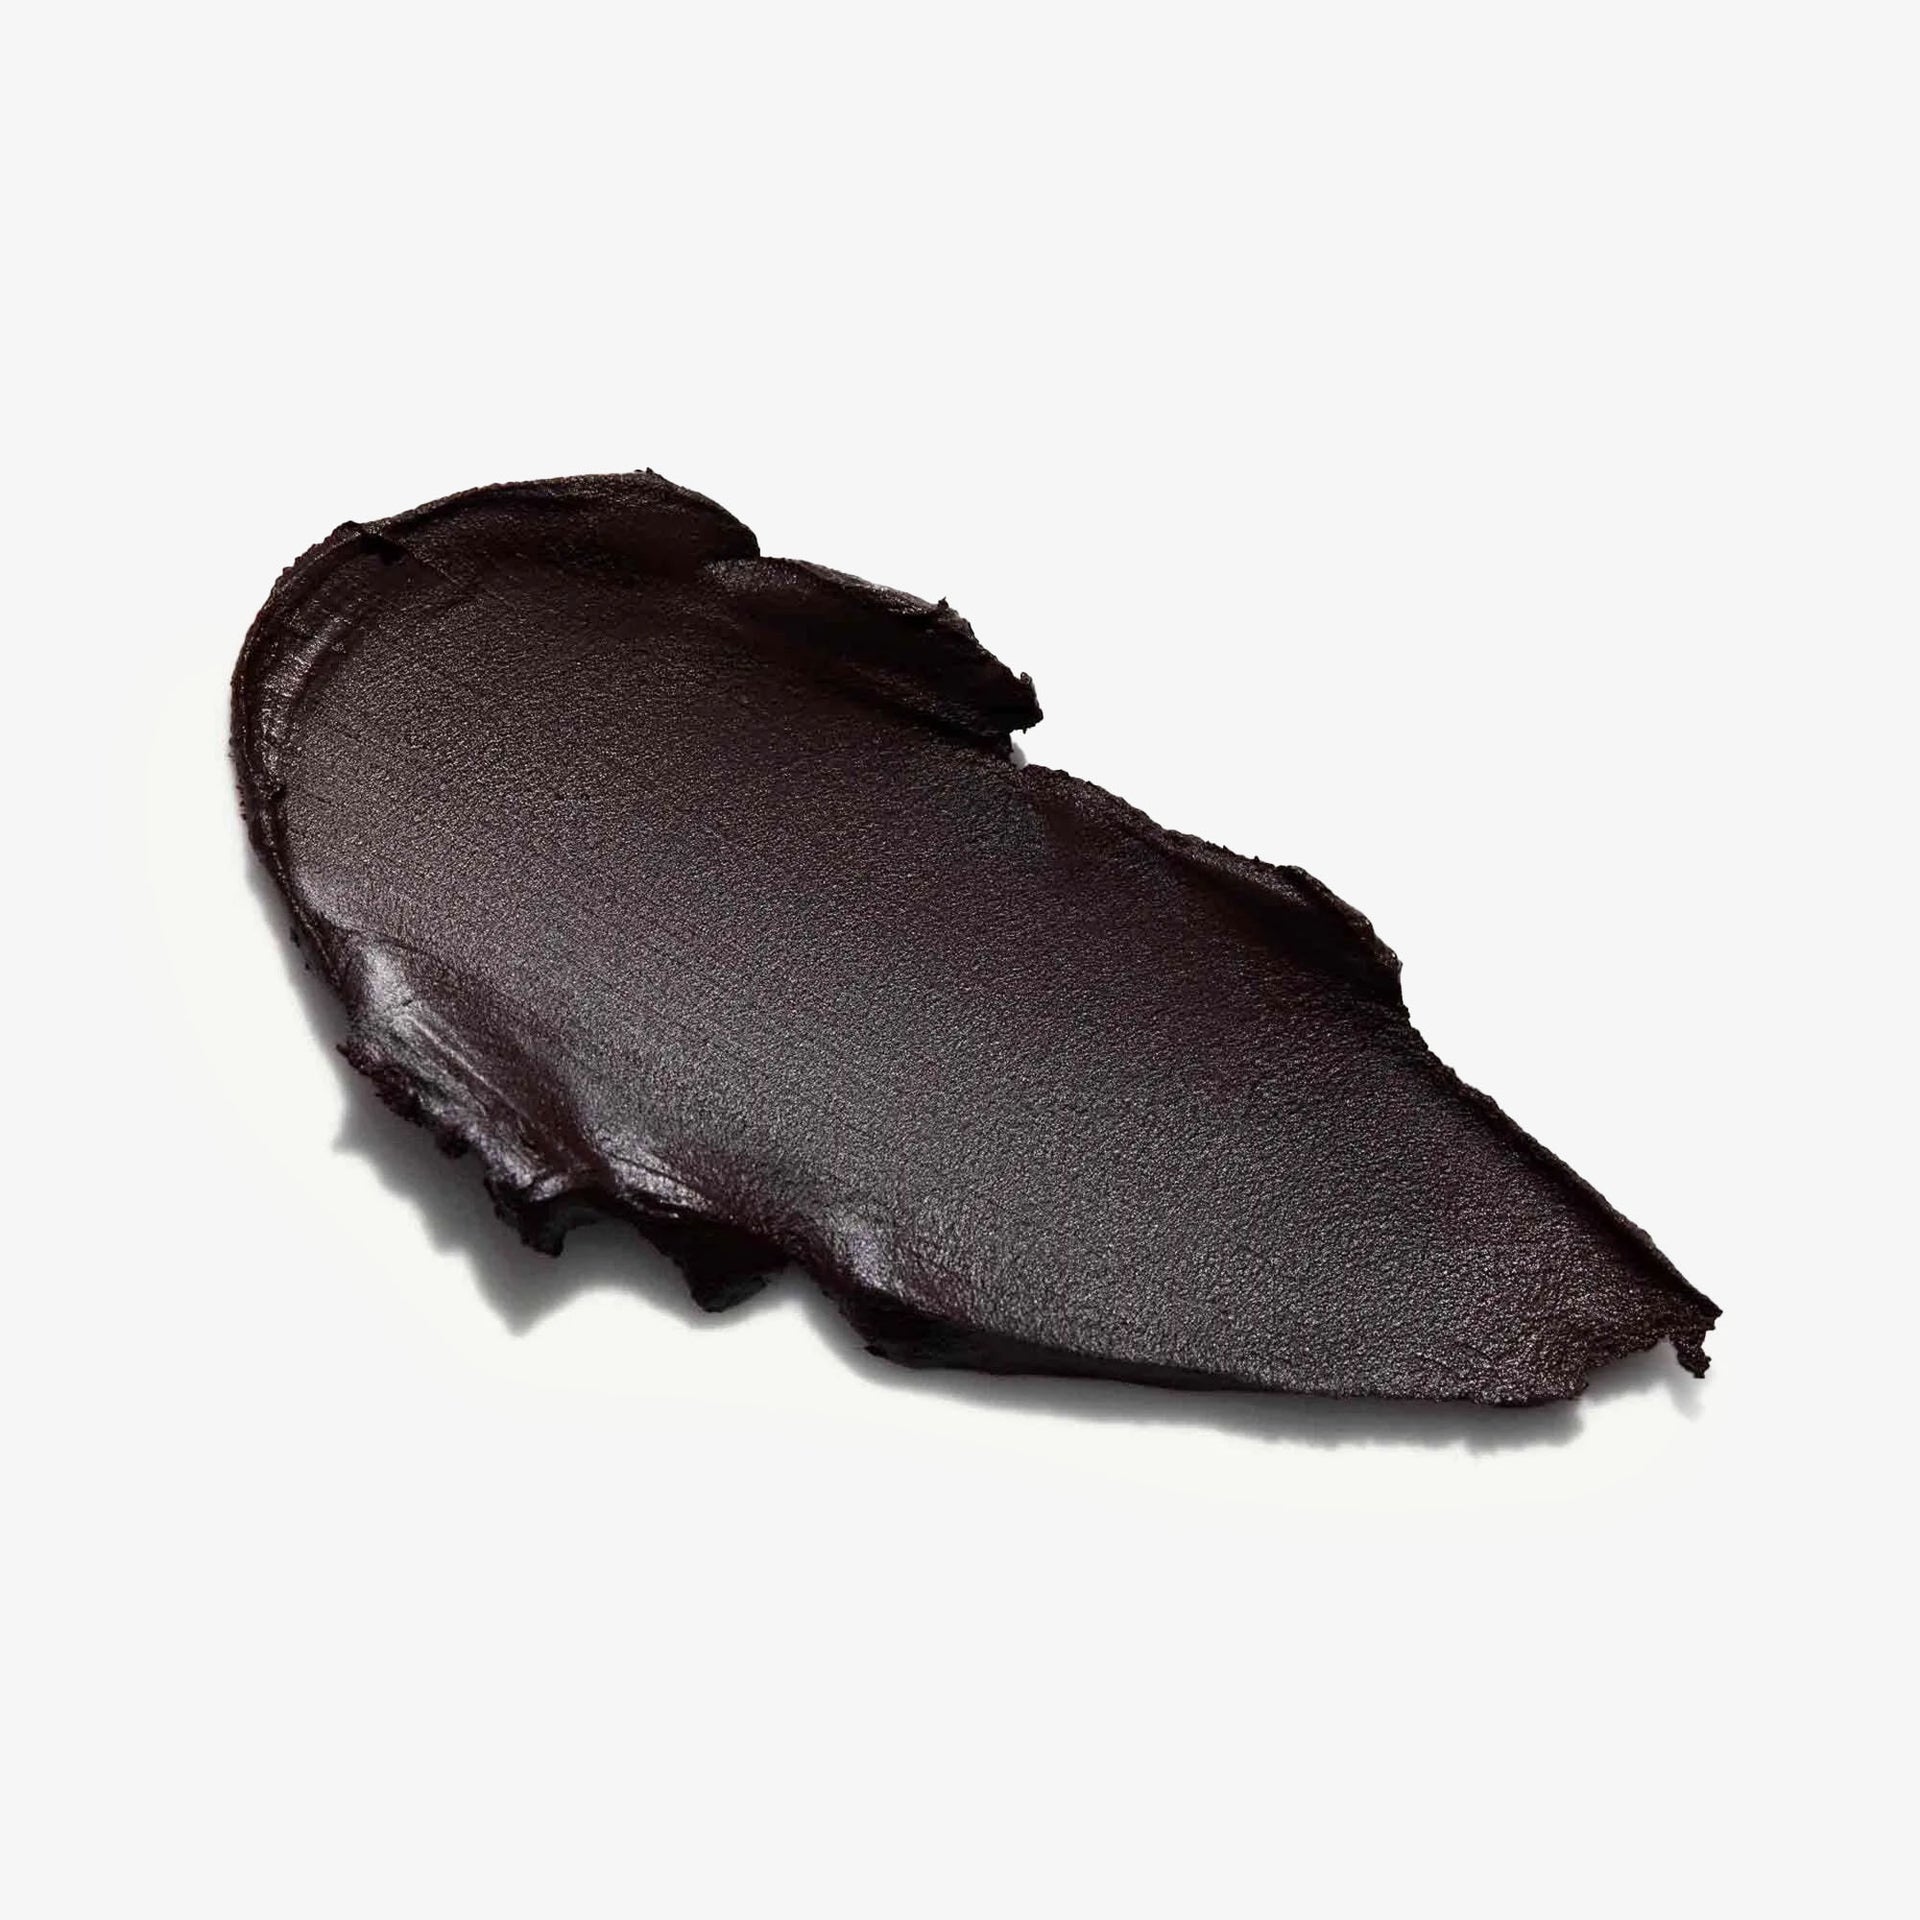 Cool Brown | Cream Bronzer Swatch Shade Cool Brown 